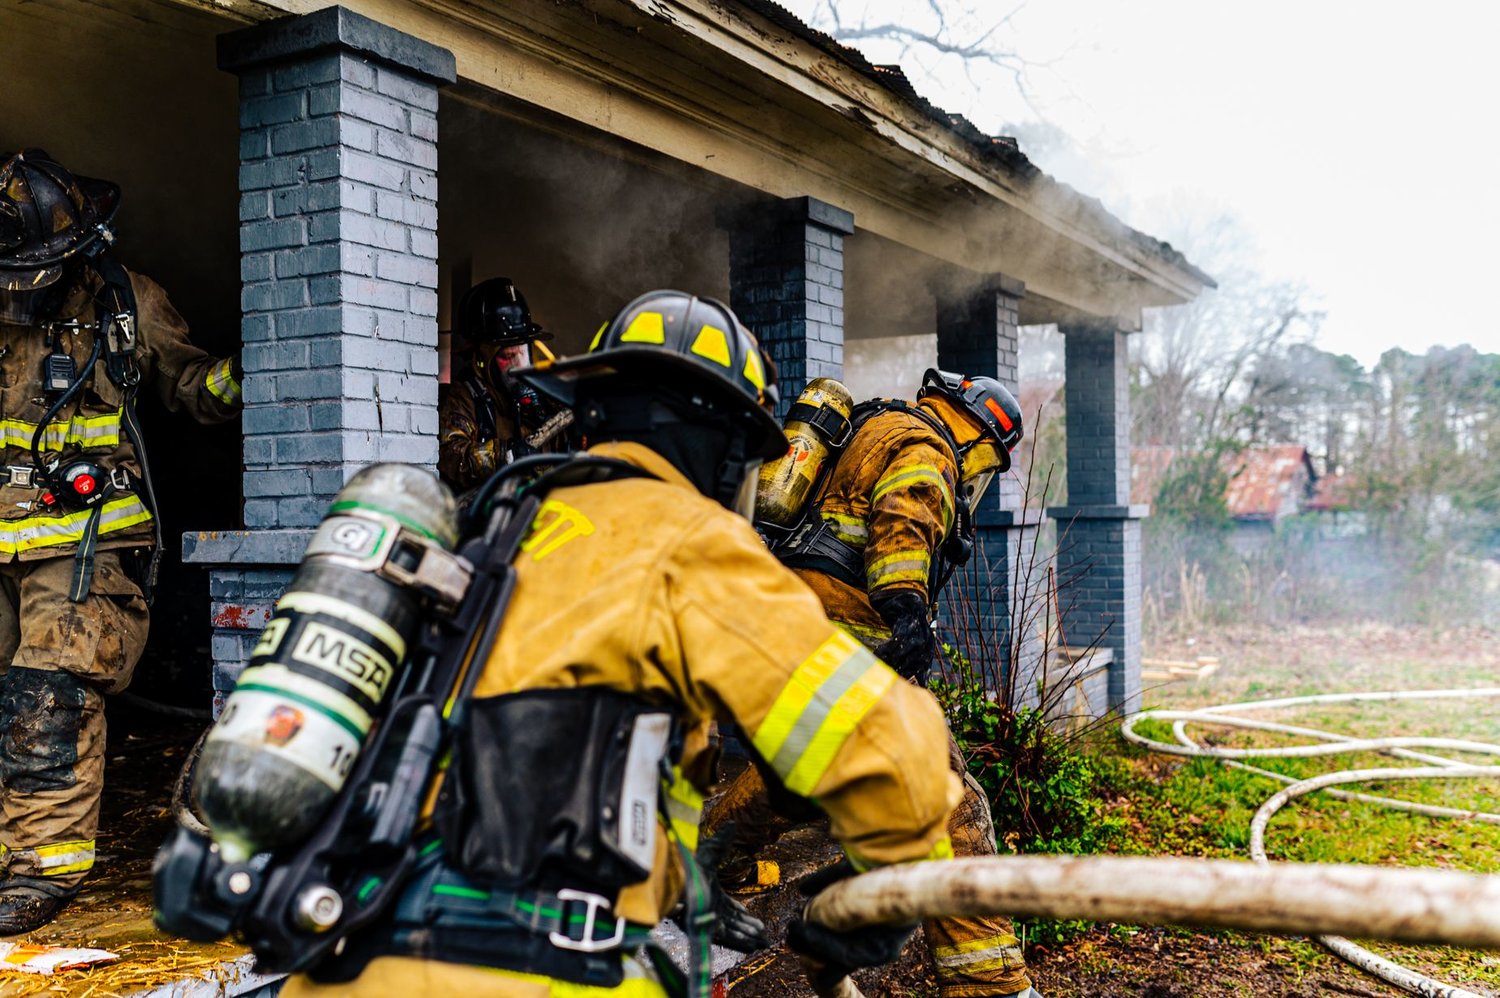 The Siler City Fire Department performed a controlled burn on a house on E. 11th Street in early 2021. The fire department was awarded one of the state’s best fire suppression ratings in September, an evaluation which represents the department’s general preparedness and can decrease property insurance costs across town.